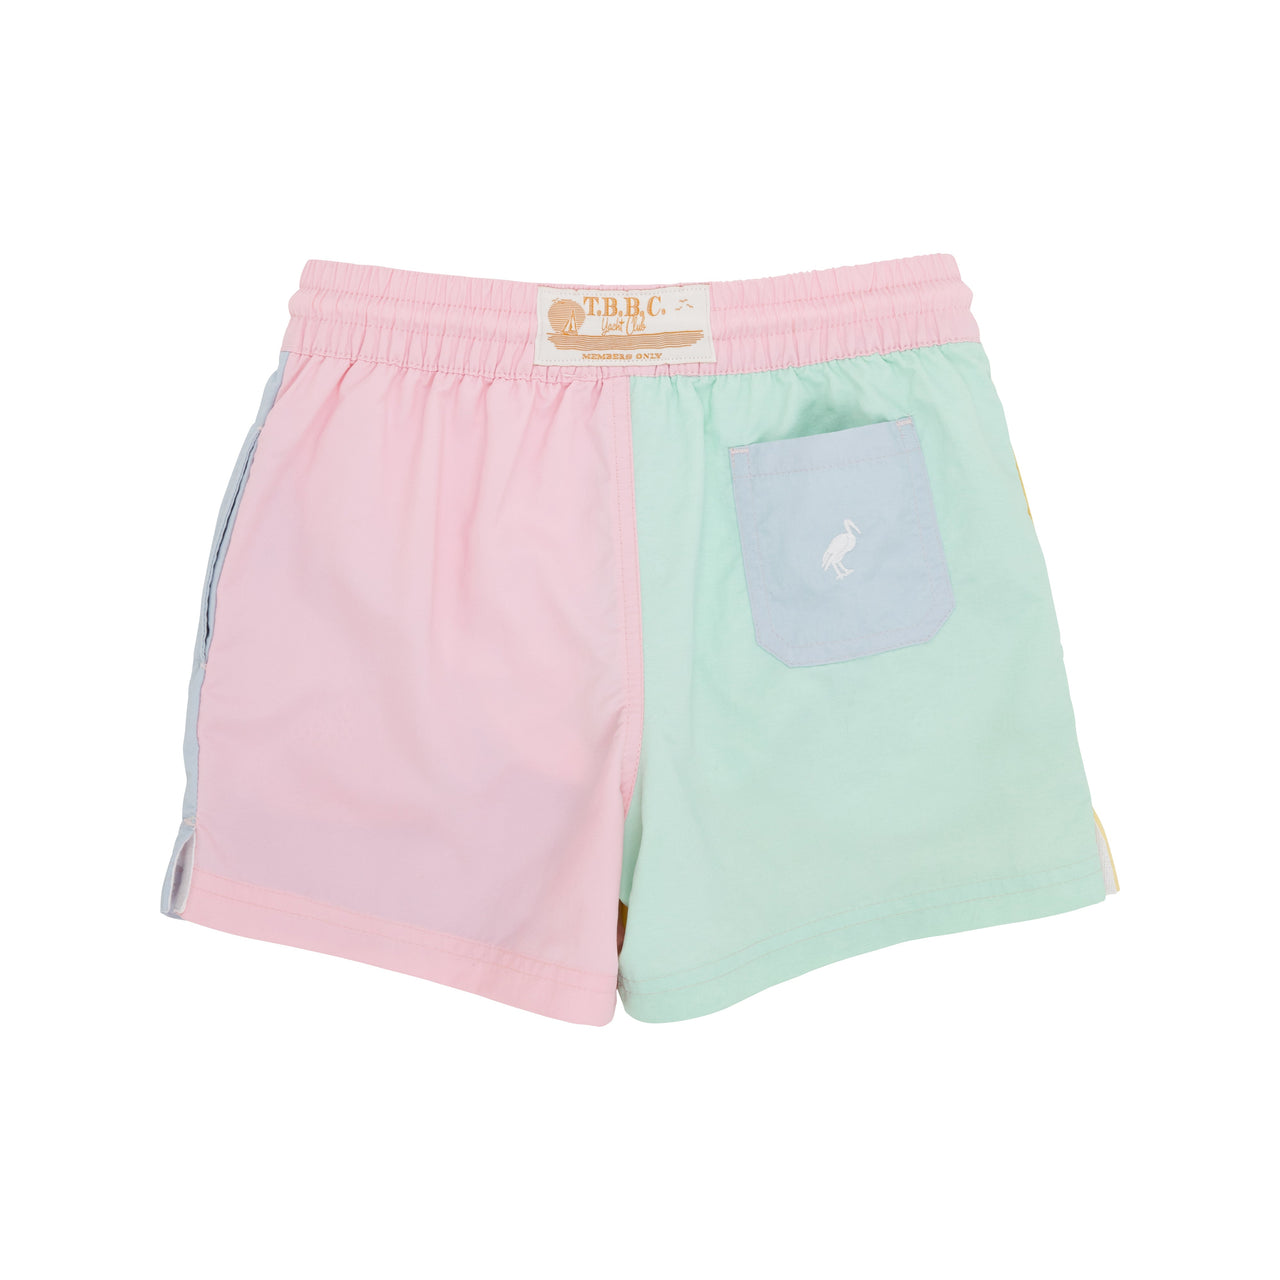 Country Club Colorblock Trunk | Preppy Pastels